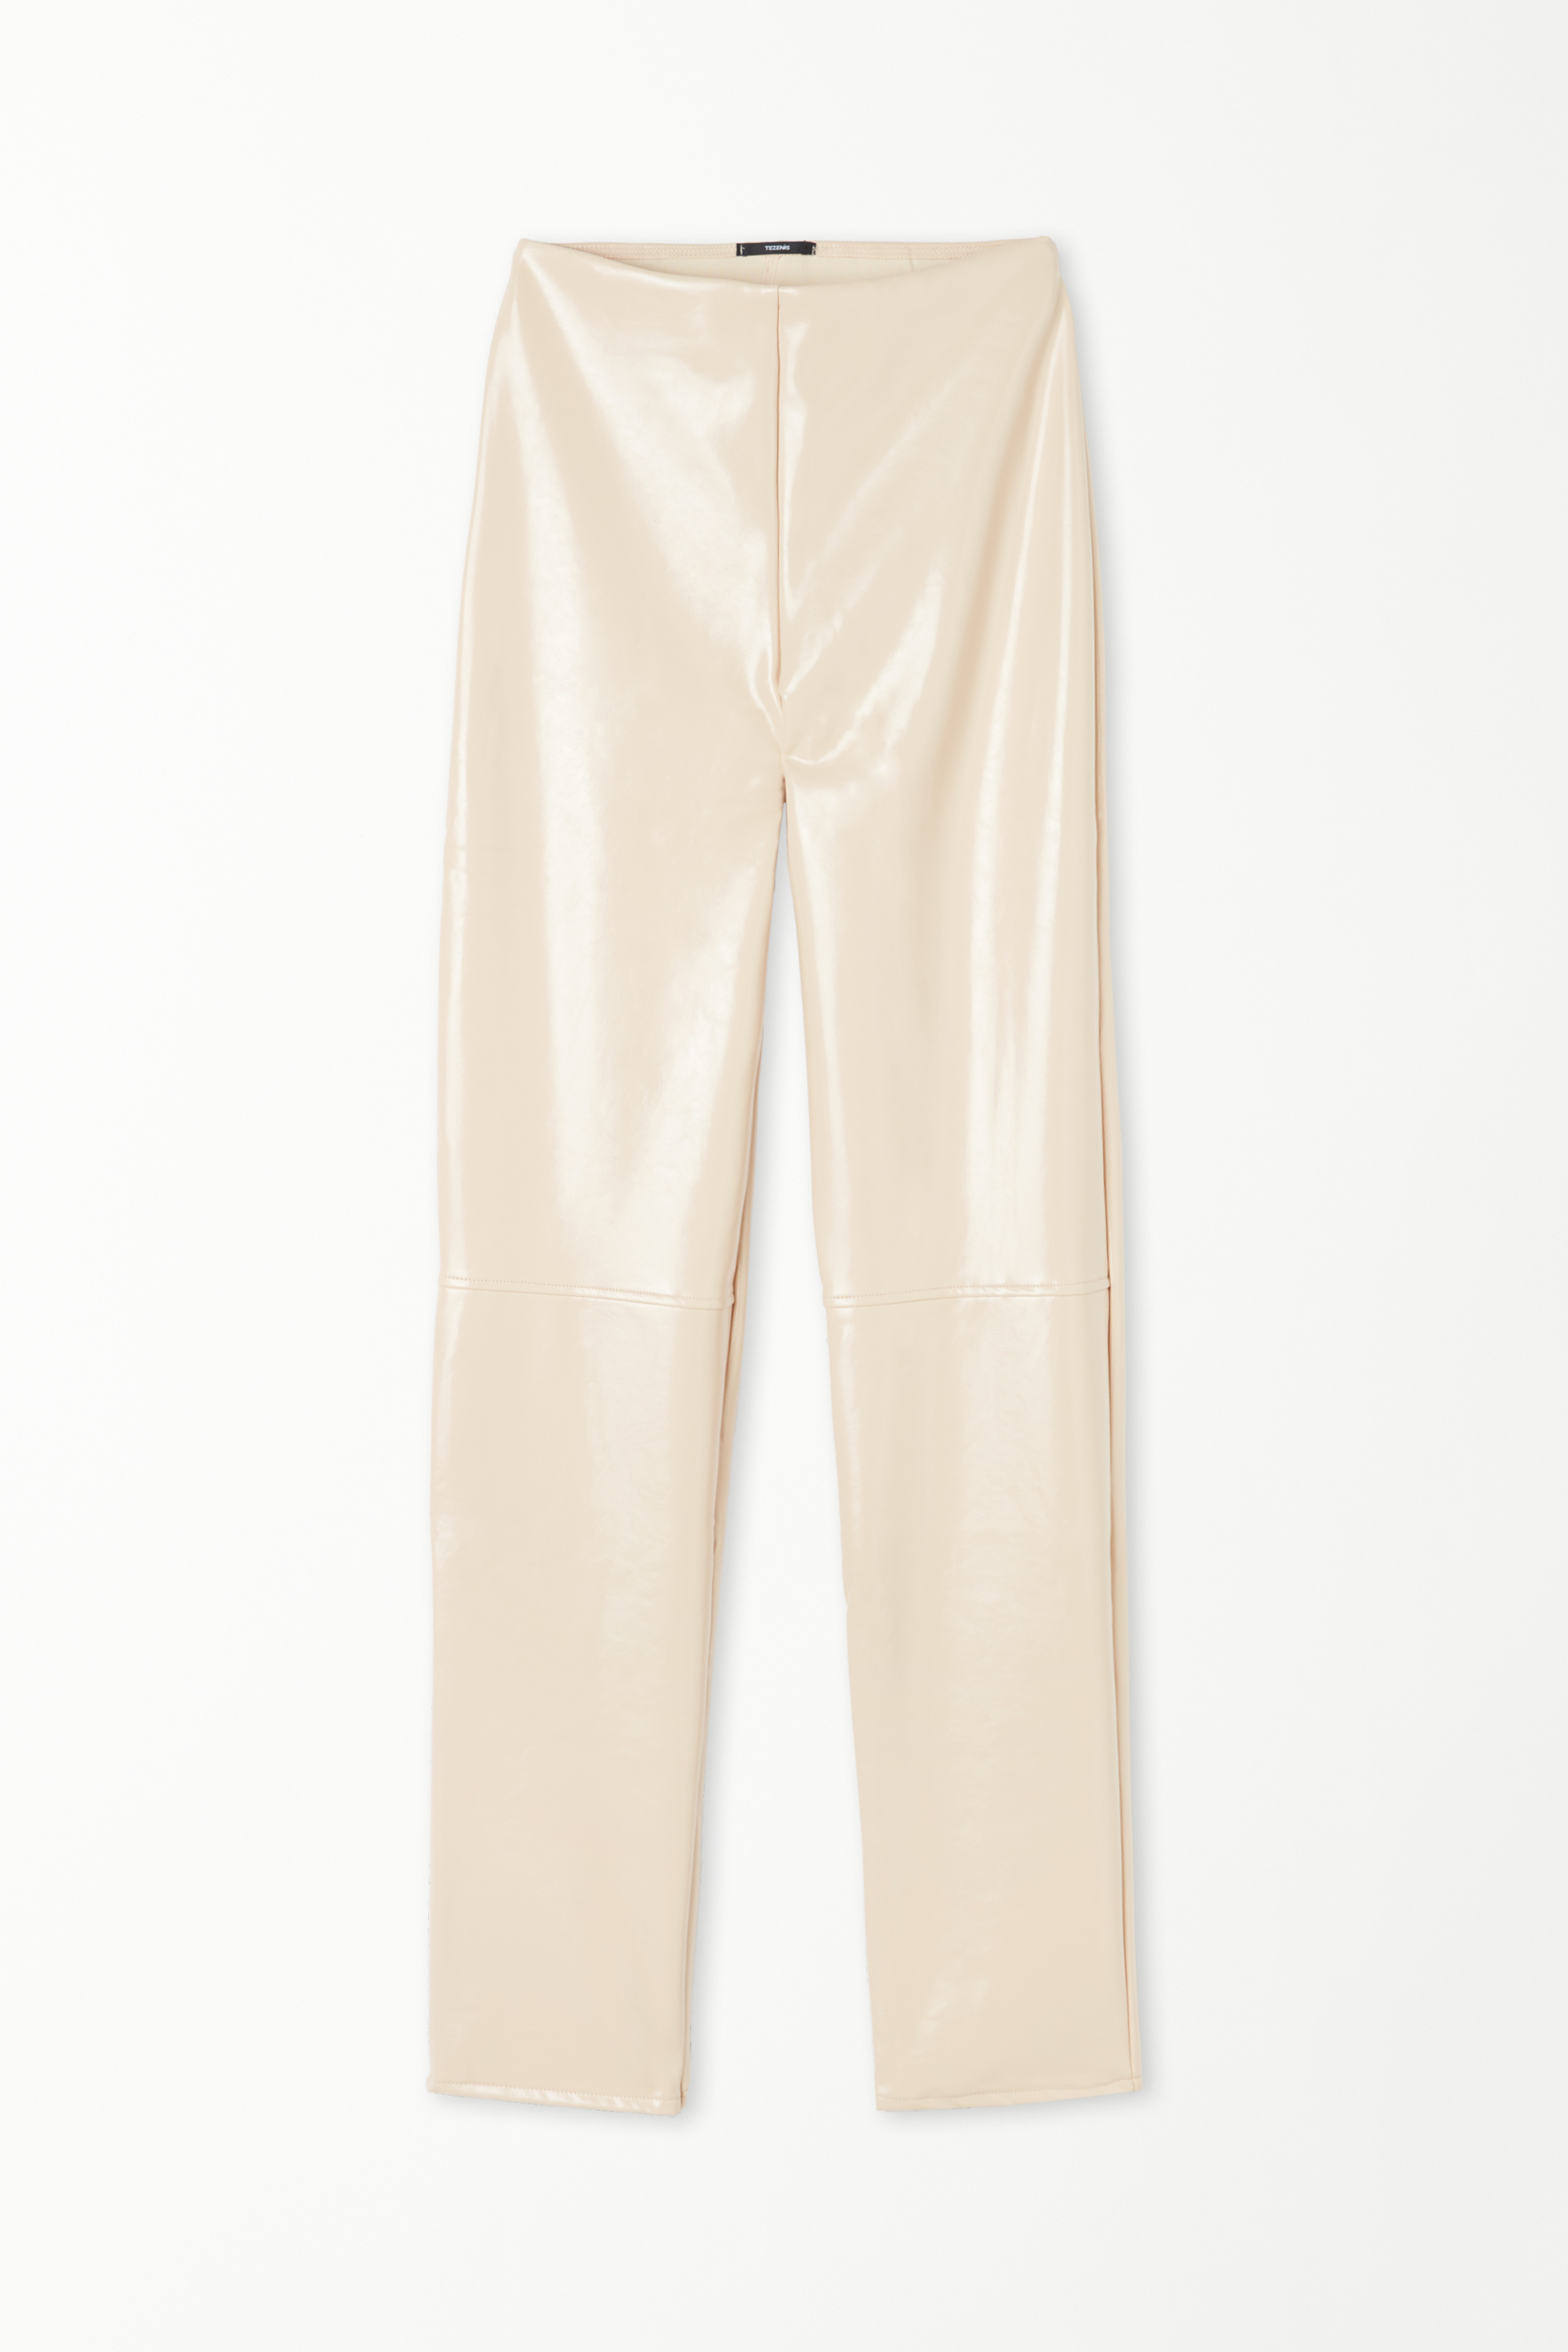 Hammered-Effect Vinyl Trousers